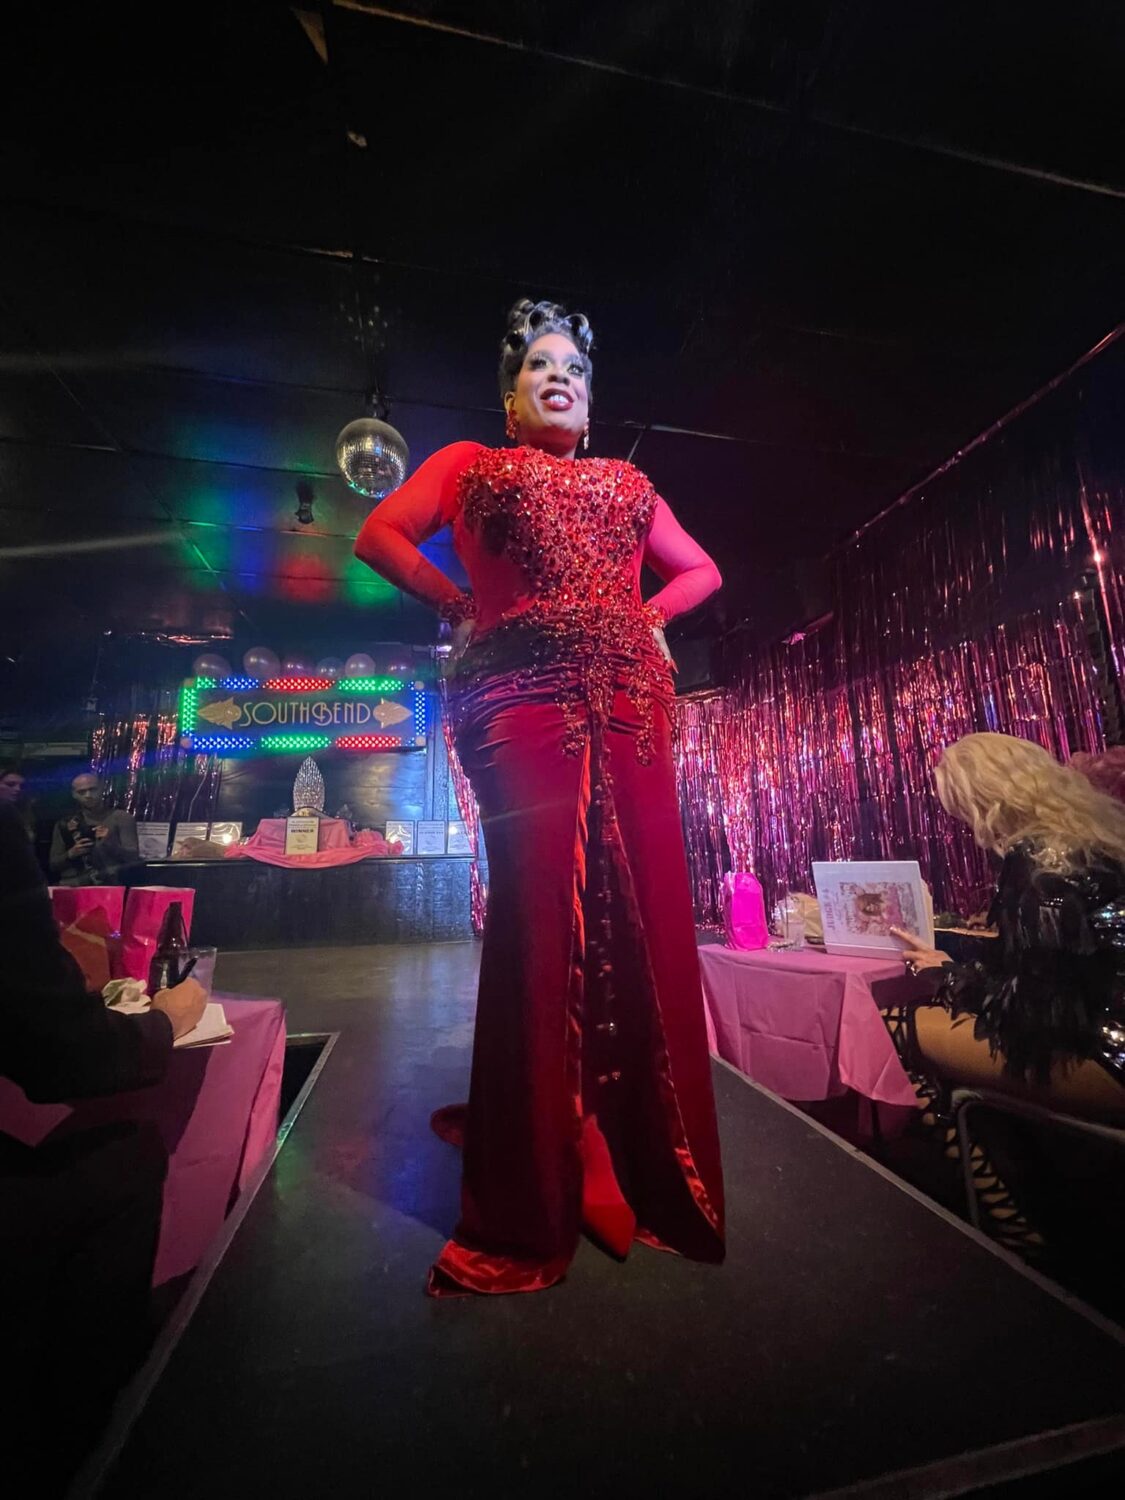 Mikayla Denise in Evening Gown Category | Miss Southbend Pageant | Southbend Tavern (Columbus, Ohio) | 1/30/2022 [Photo by Vintage Blue]